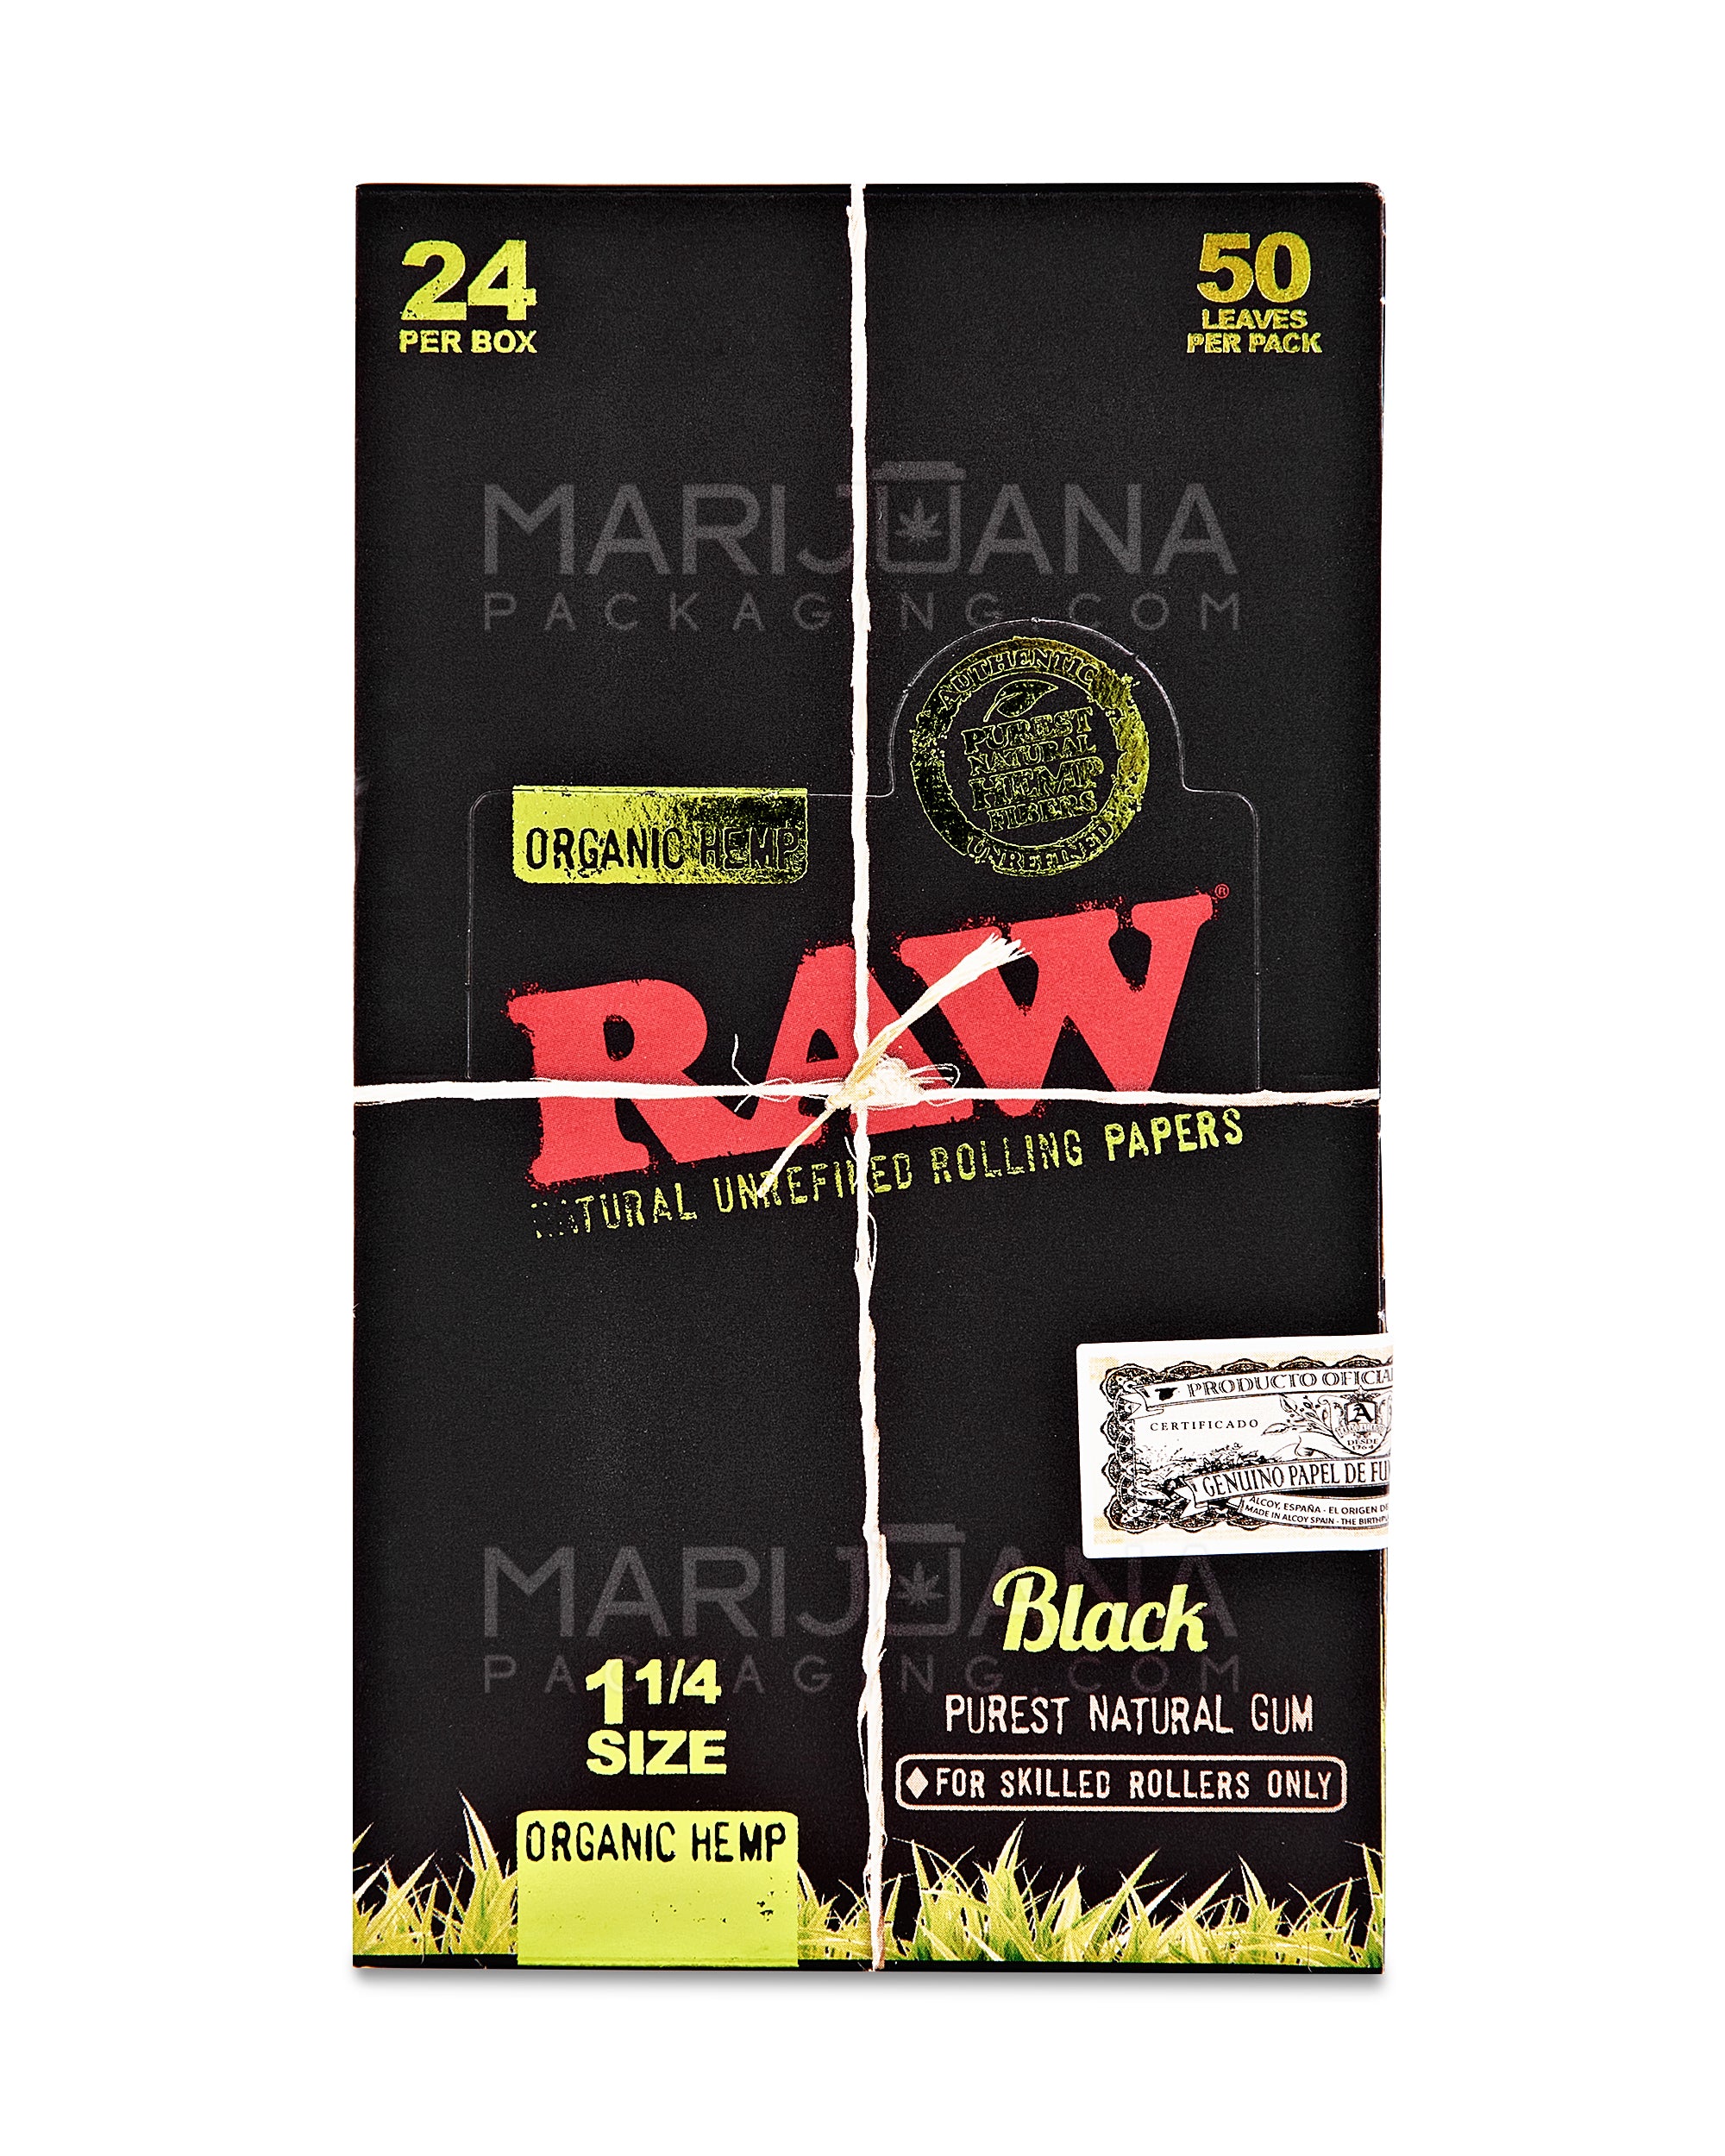 RAW Classic Black Natural 1 1/4 Size Rolling Papers